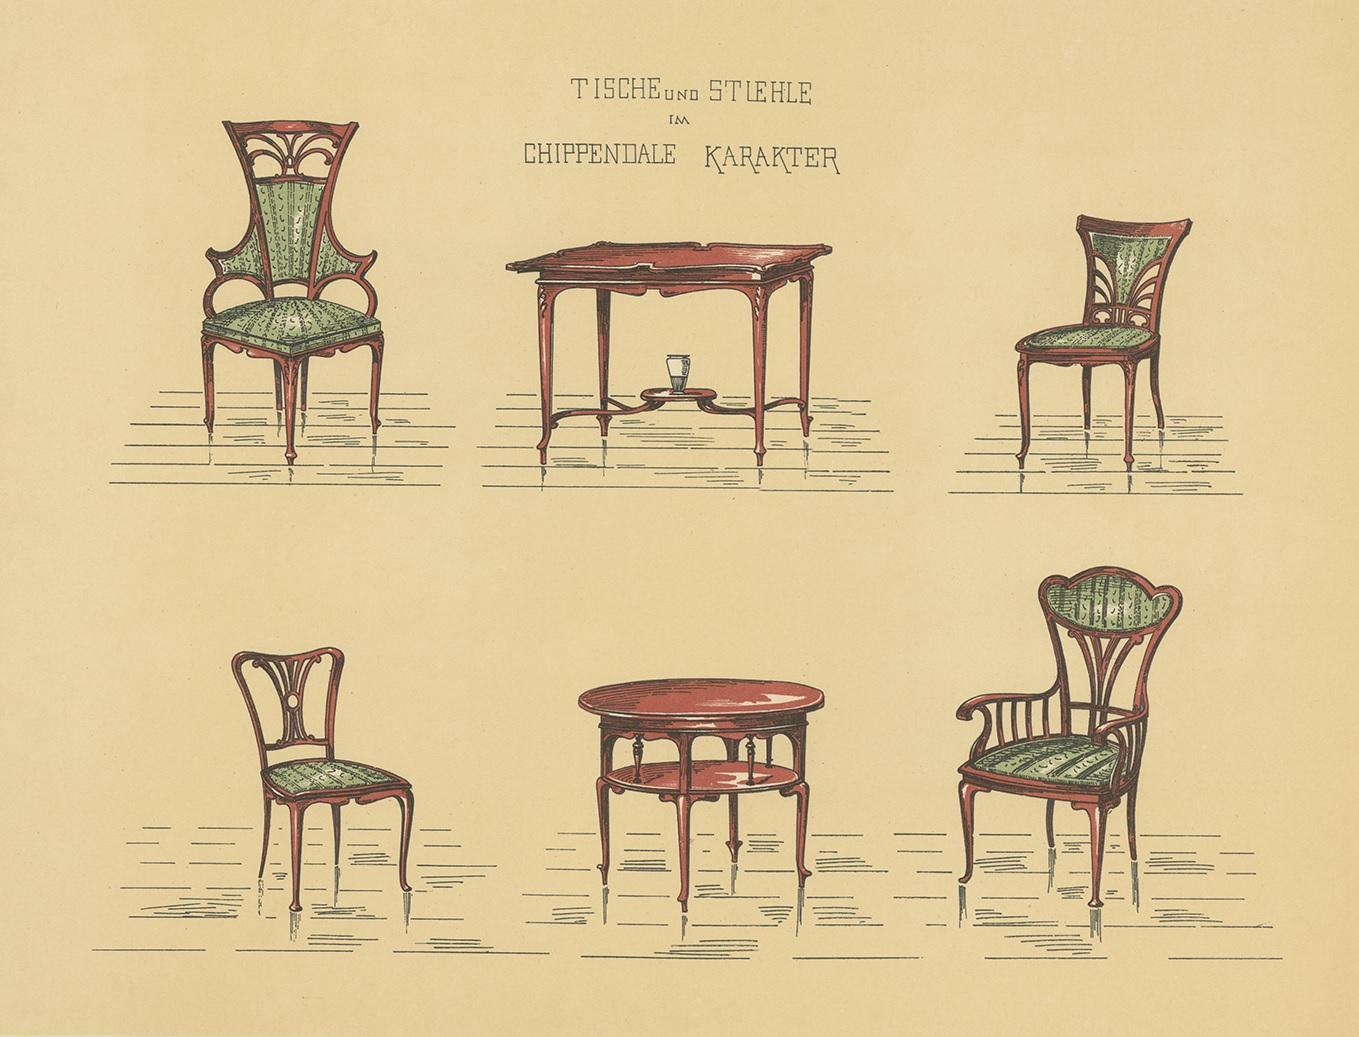 Antique print titled 'Tische und Stuehle im Chippendale Karakter'. Lithograph of tables and chairs. This print originates from 'Det Moderna Hemmet' by Johannes Kramer. Published by Ferdinand Hey'l, circa 1910.